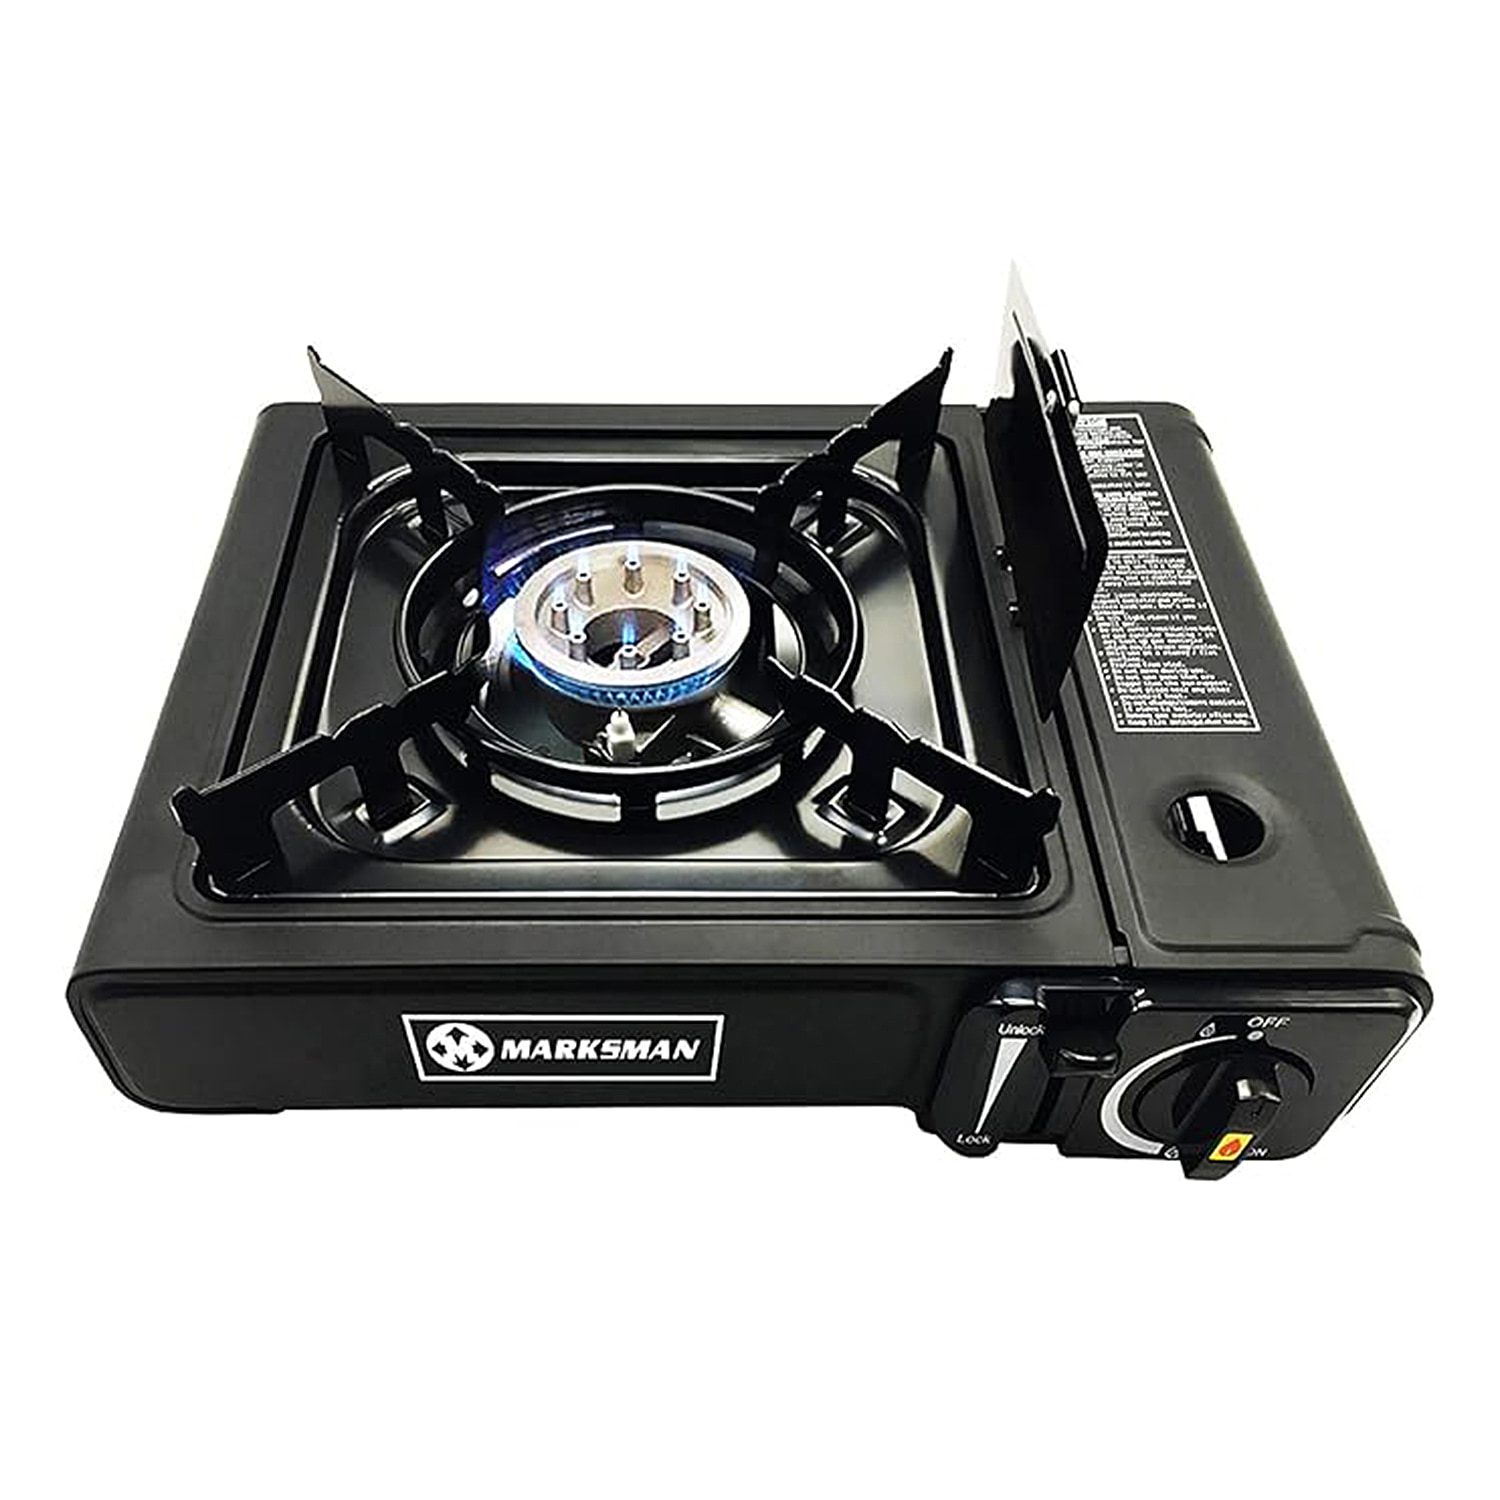 New-Launch-Portable-Gas-Stove-with-Auto-Safety-Shutoff